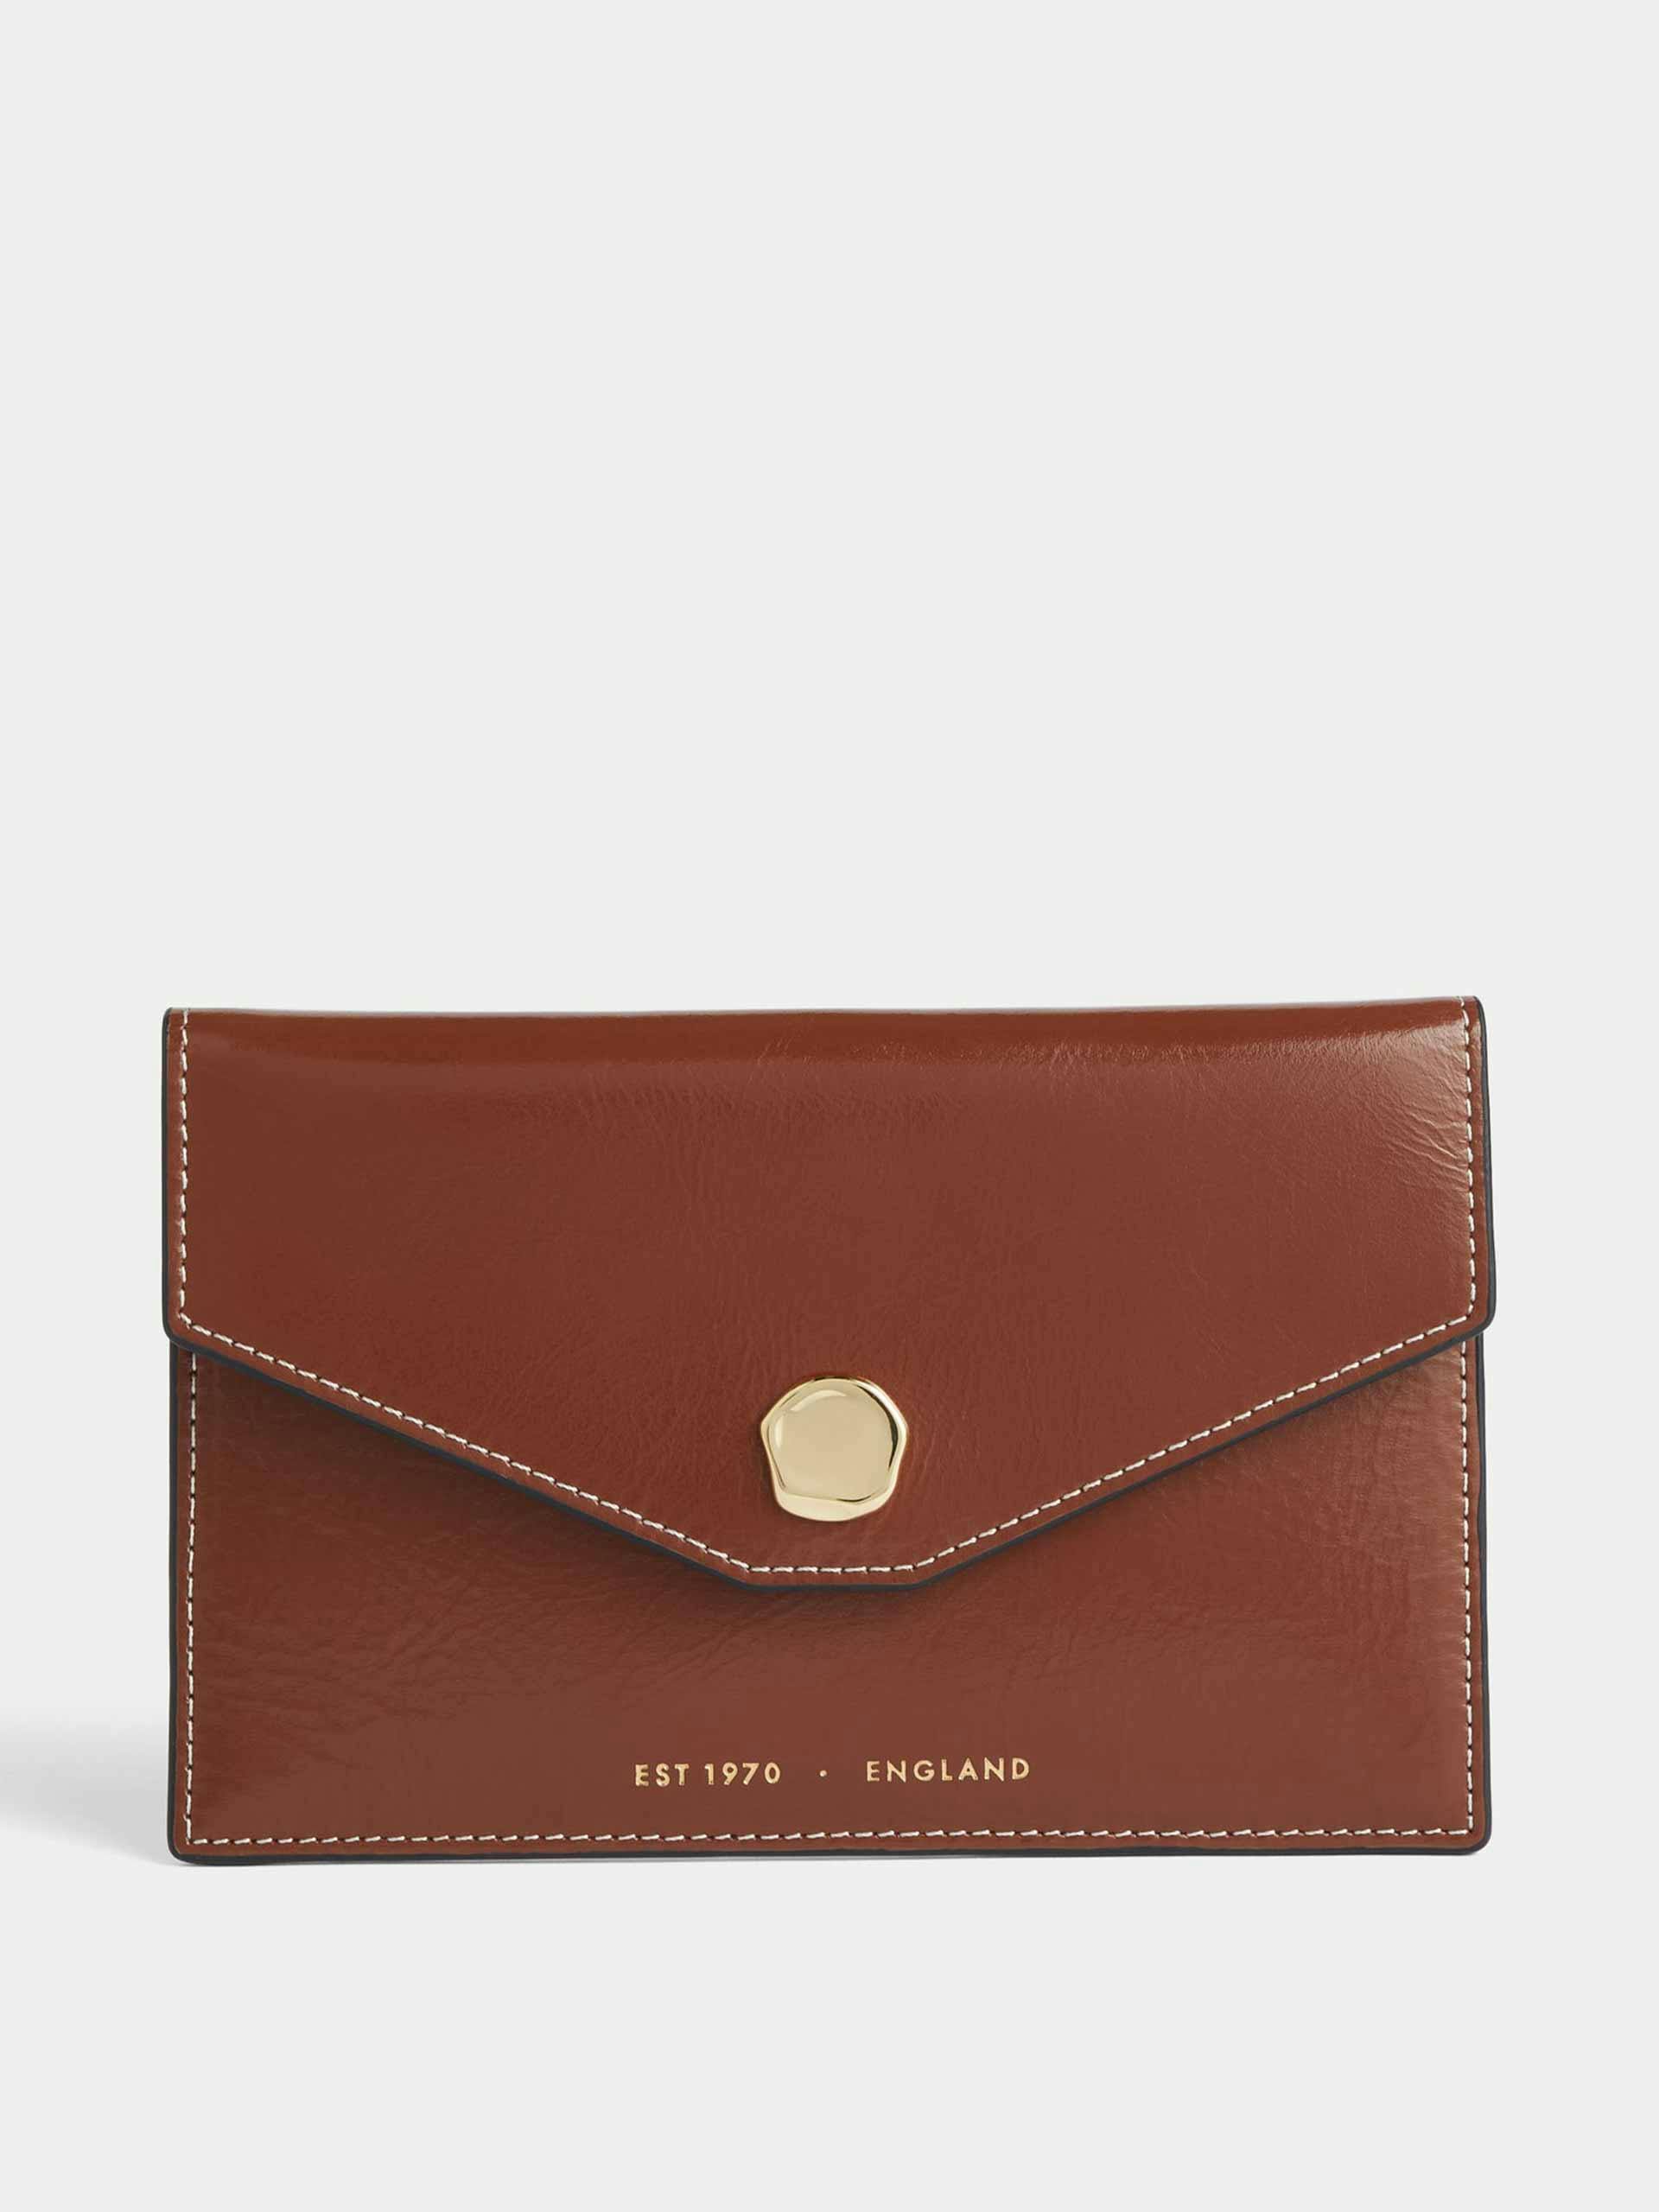 Textured leather pouch